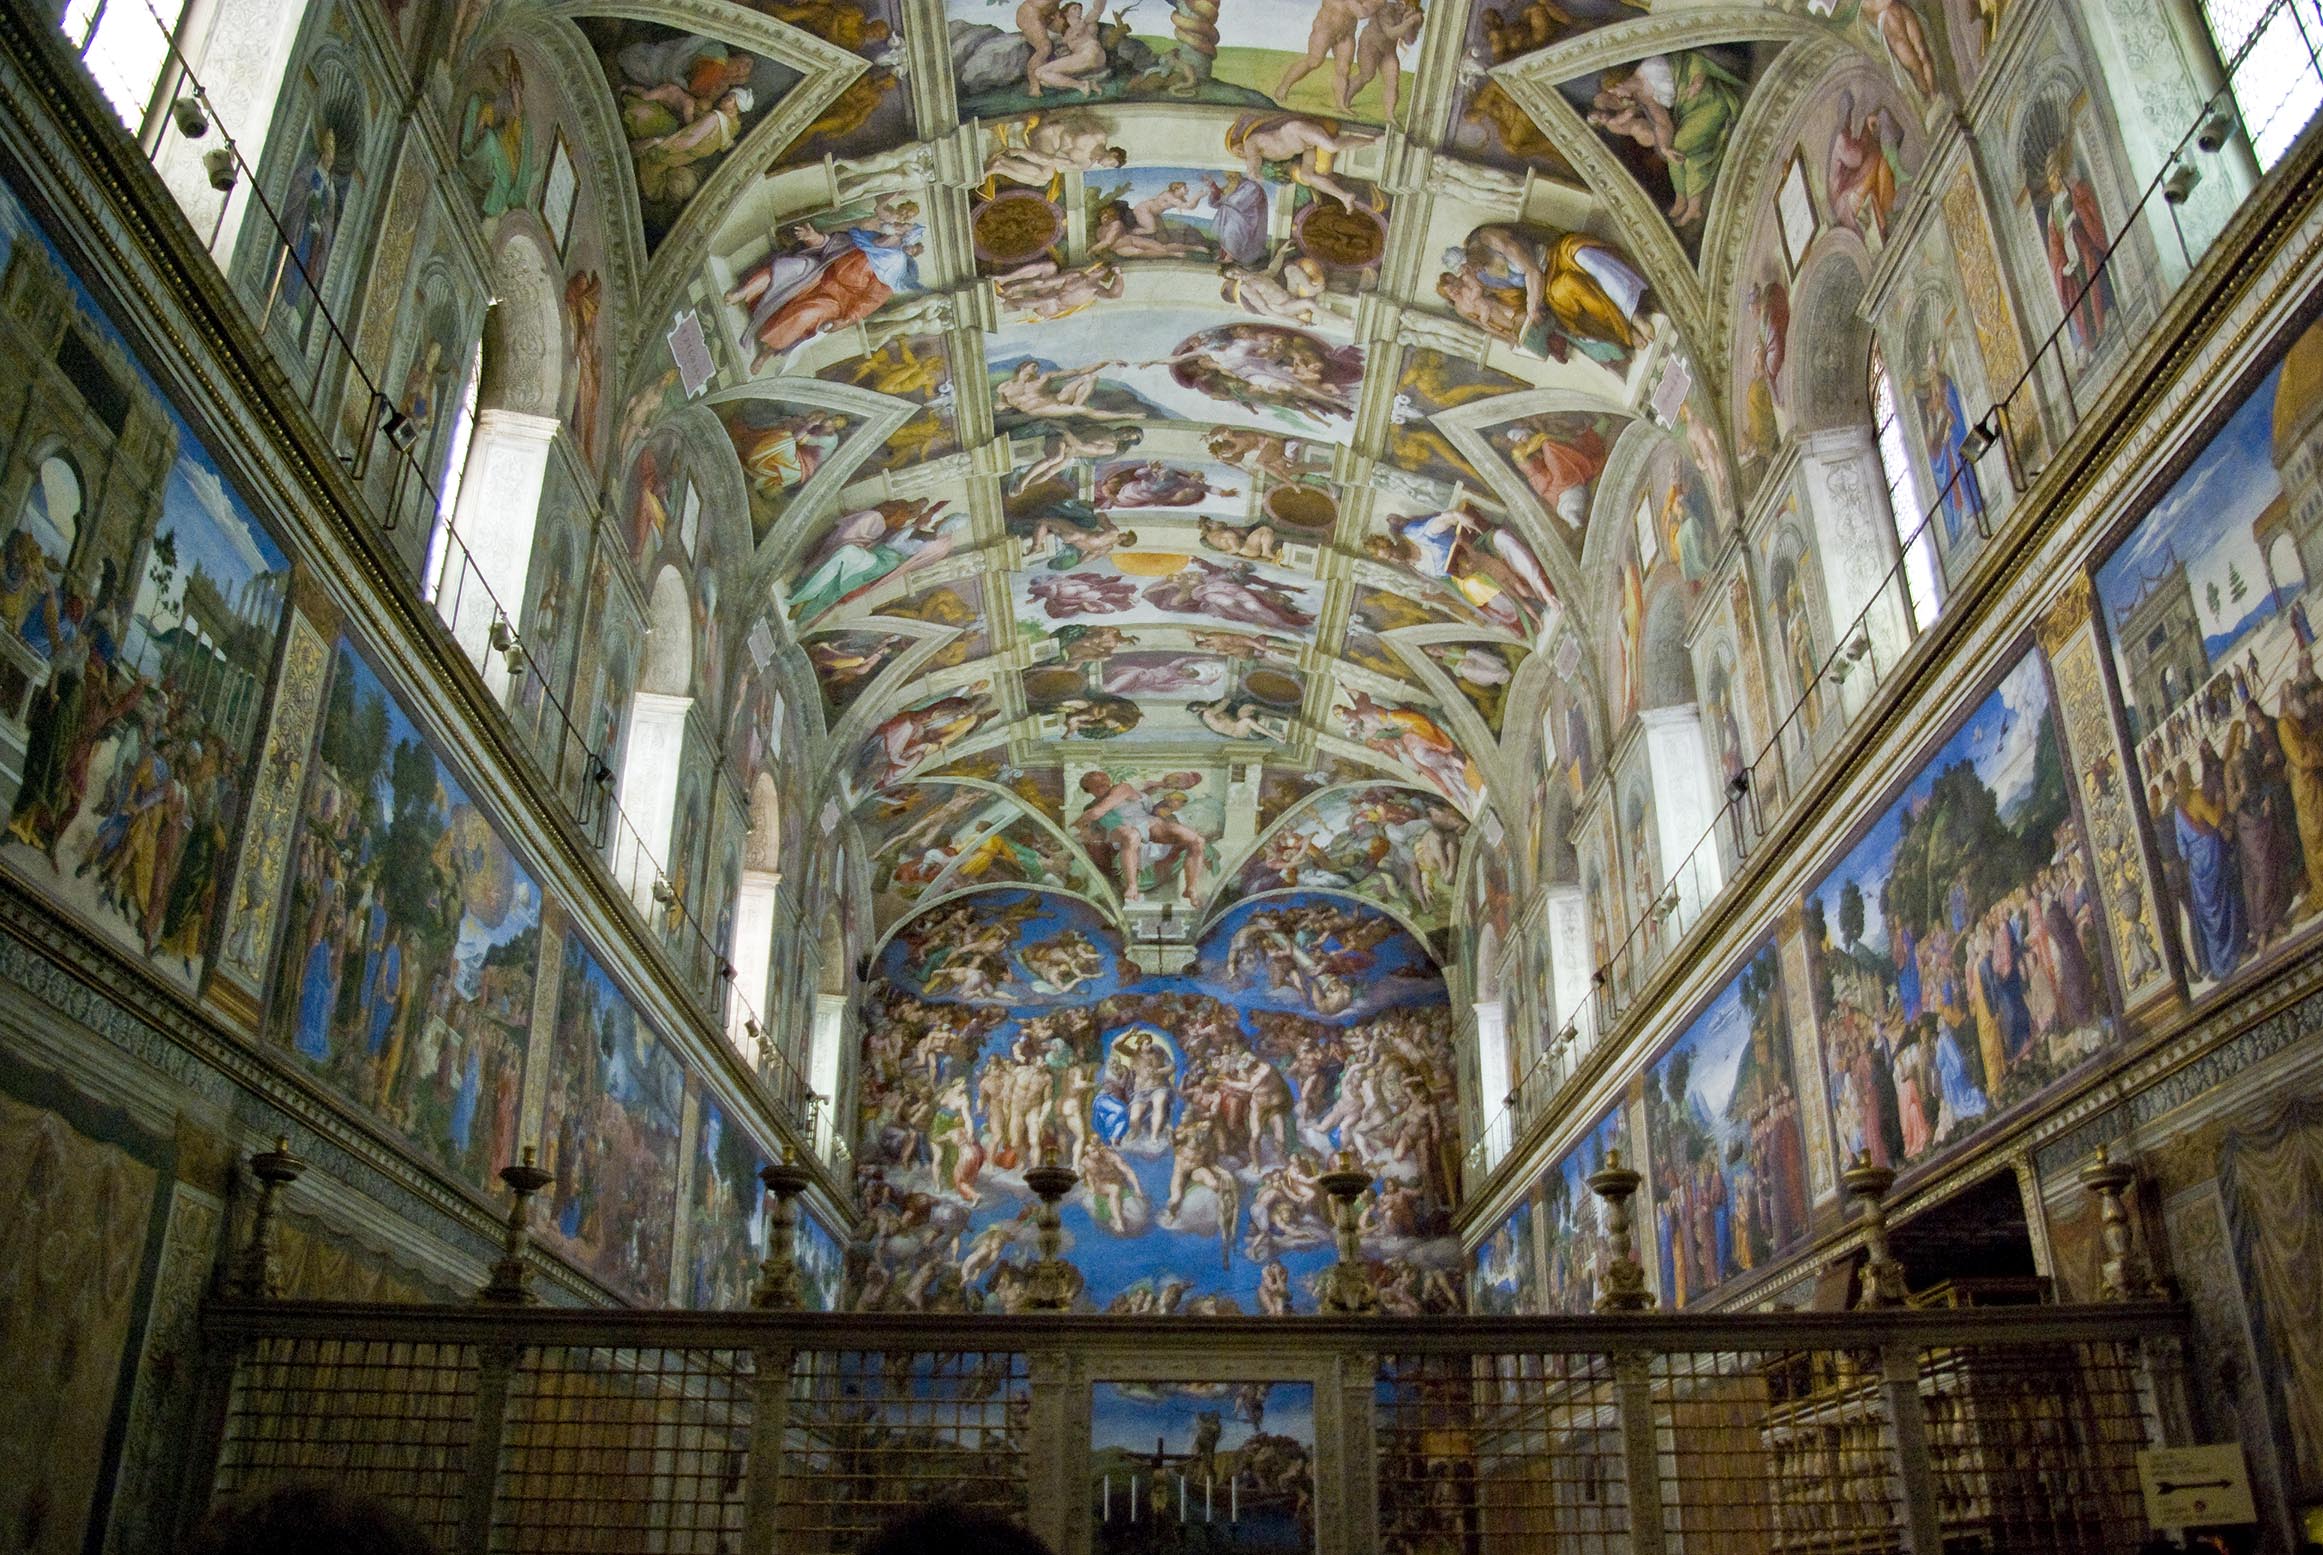 The ceiling of the Sistine Chapel was completed by Michelangelo in 1512. At a time before there were movies or even photographs, seeing these multidimensional scenes high above must have been overwhelming and even otherworldly. The far wall shows Michelangelo’s The Last Judgment, completed many years later in 1541. Frescoes along the other walls are by various Renaissance artists. (Image via Wikimedia Commons) 